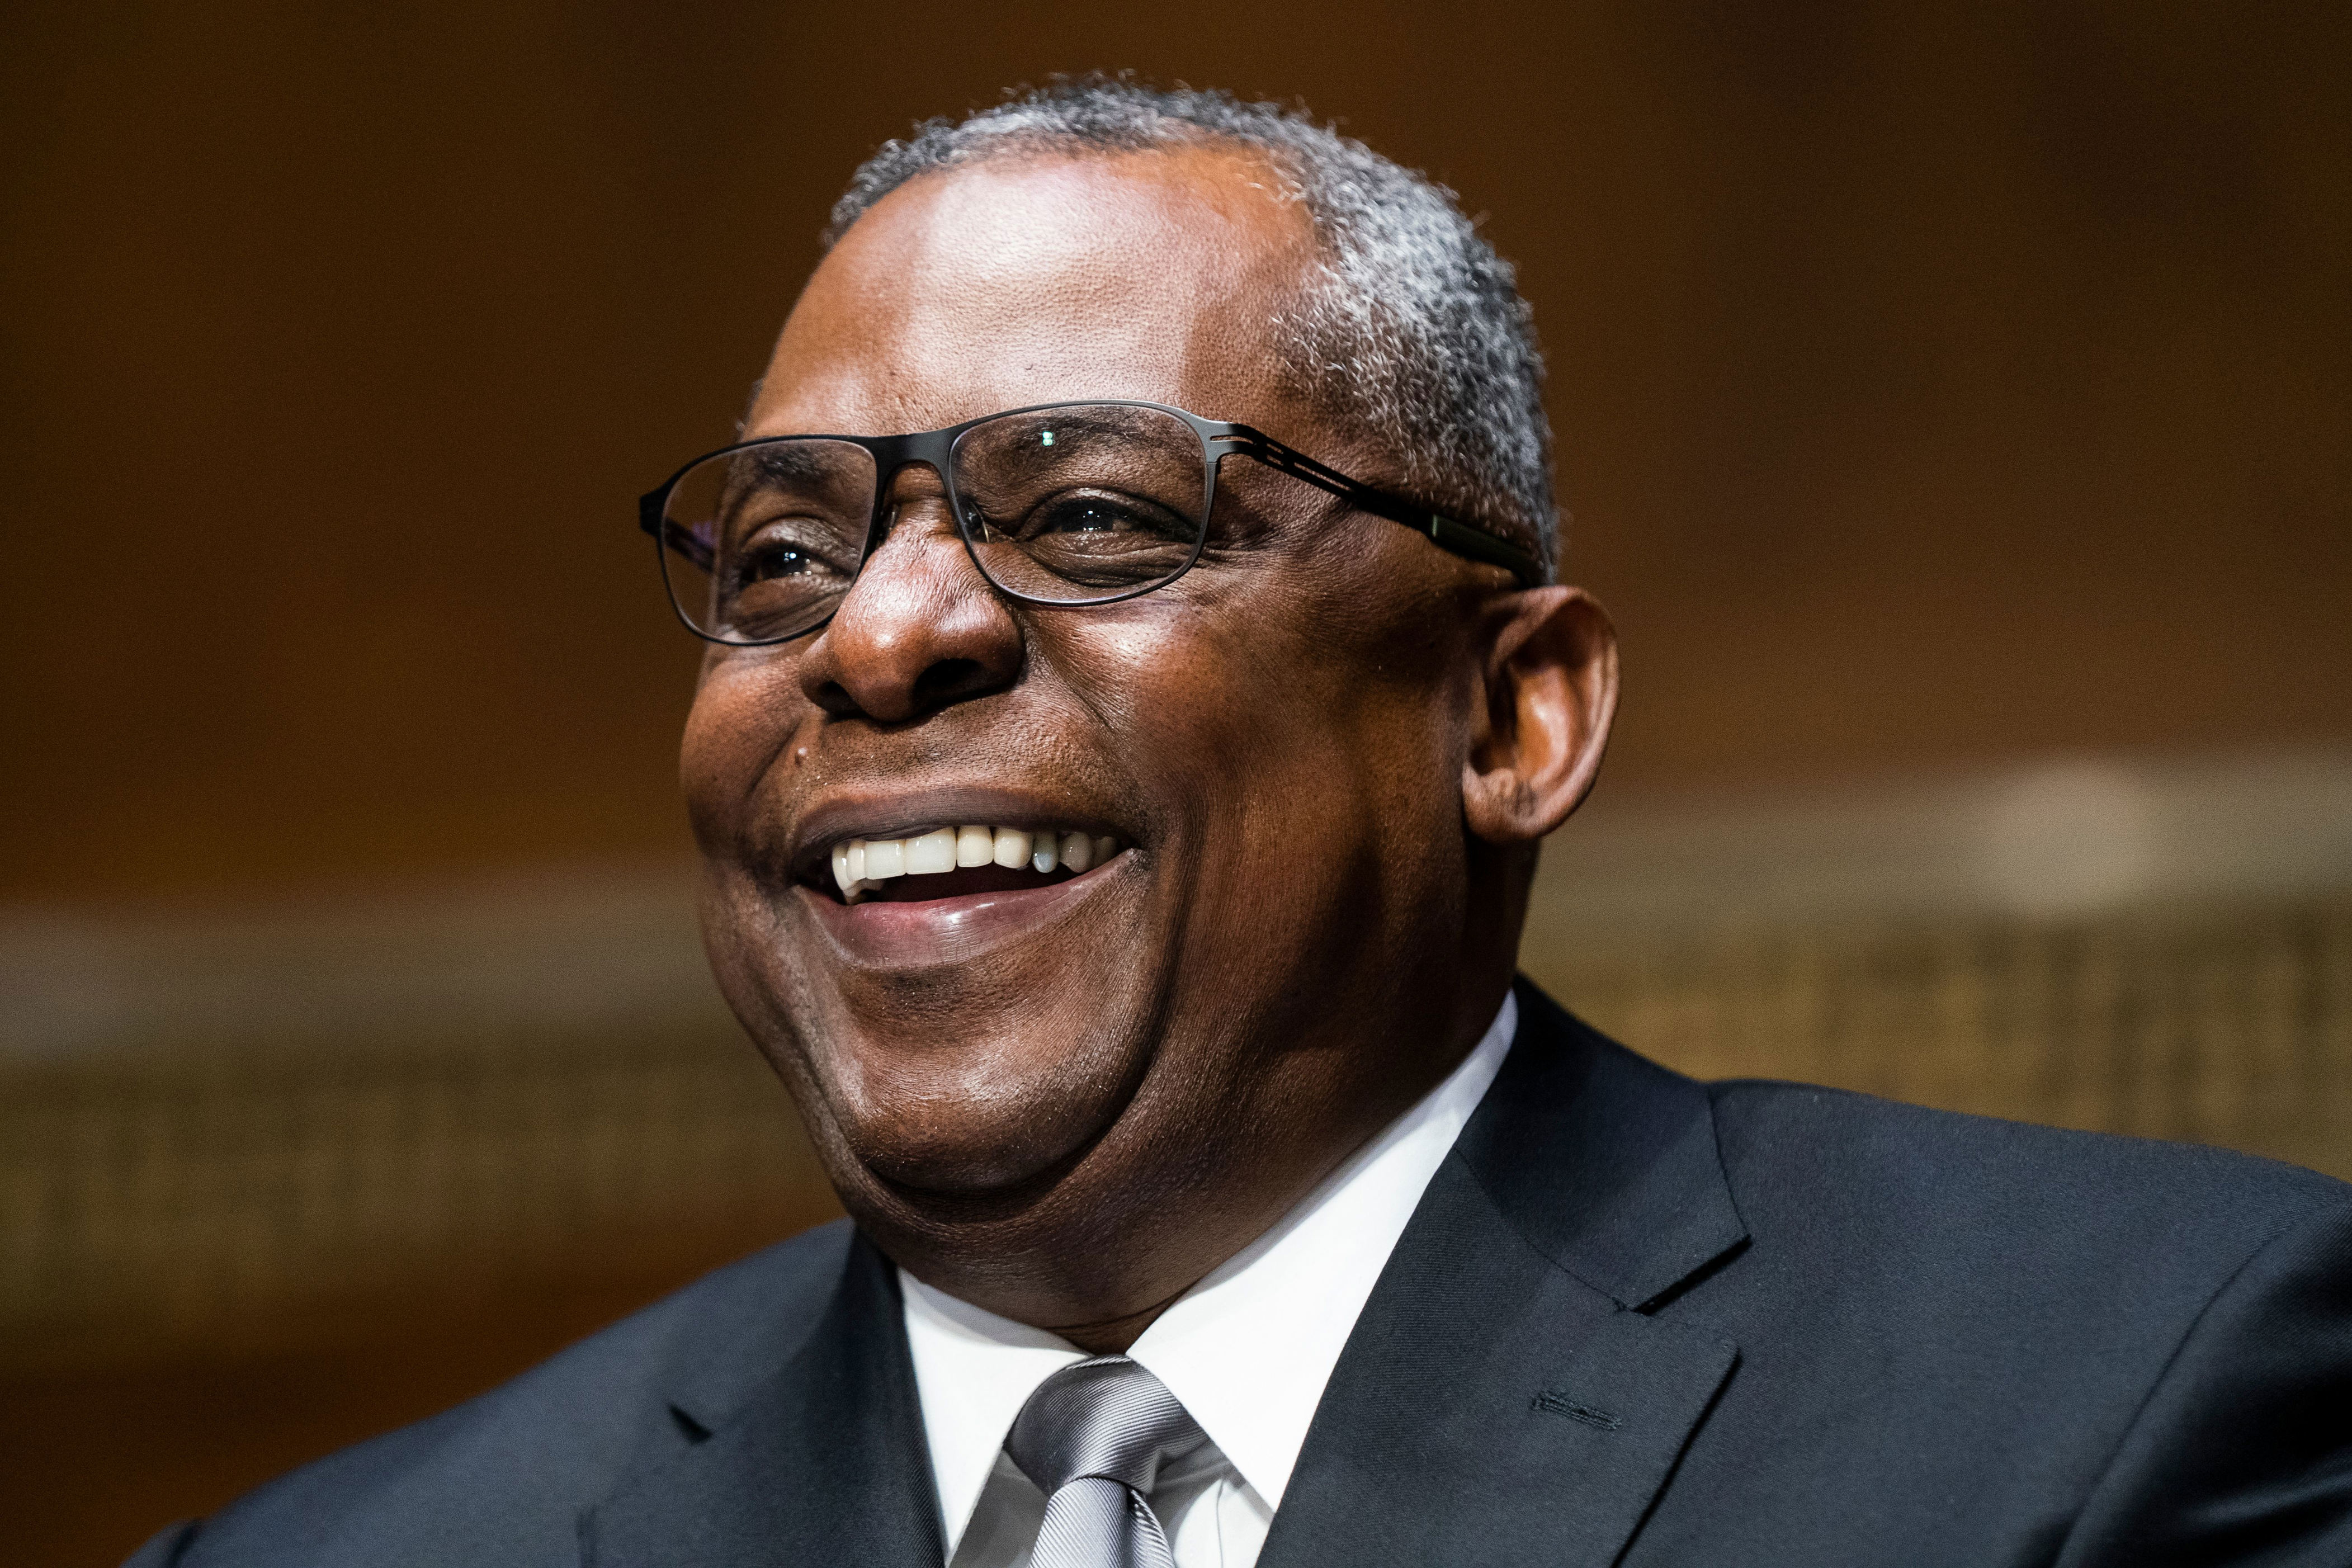 <p>In January 2021, President Joe Biden tapped Lloyd Austin to join his cabinet. On Jan. 22, the retired four-star Army general was confirmed by the Senate -- making him the first Black secretary of defense in U.S. history.</p>